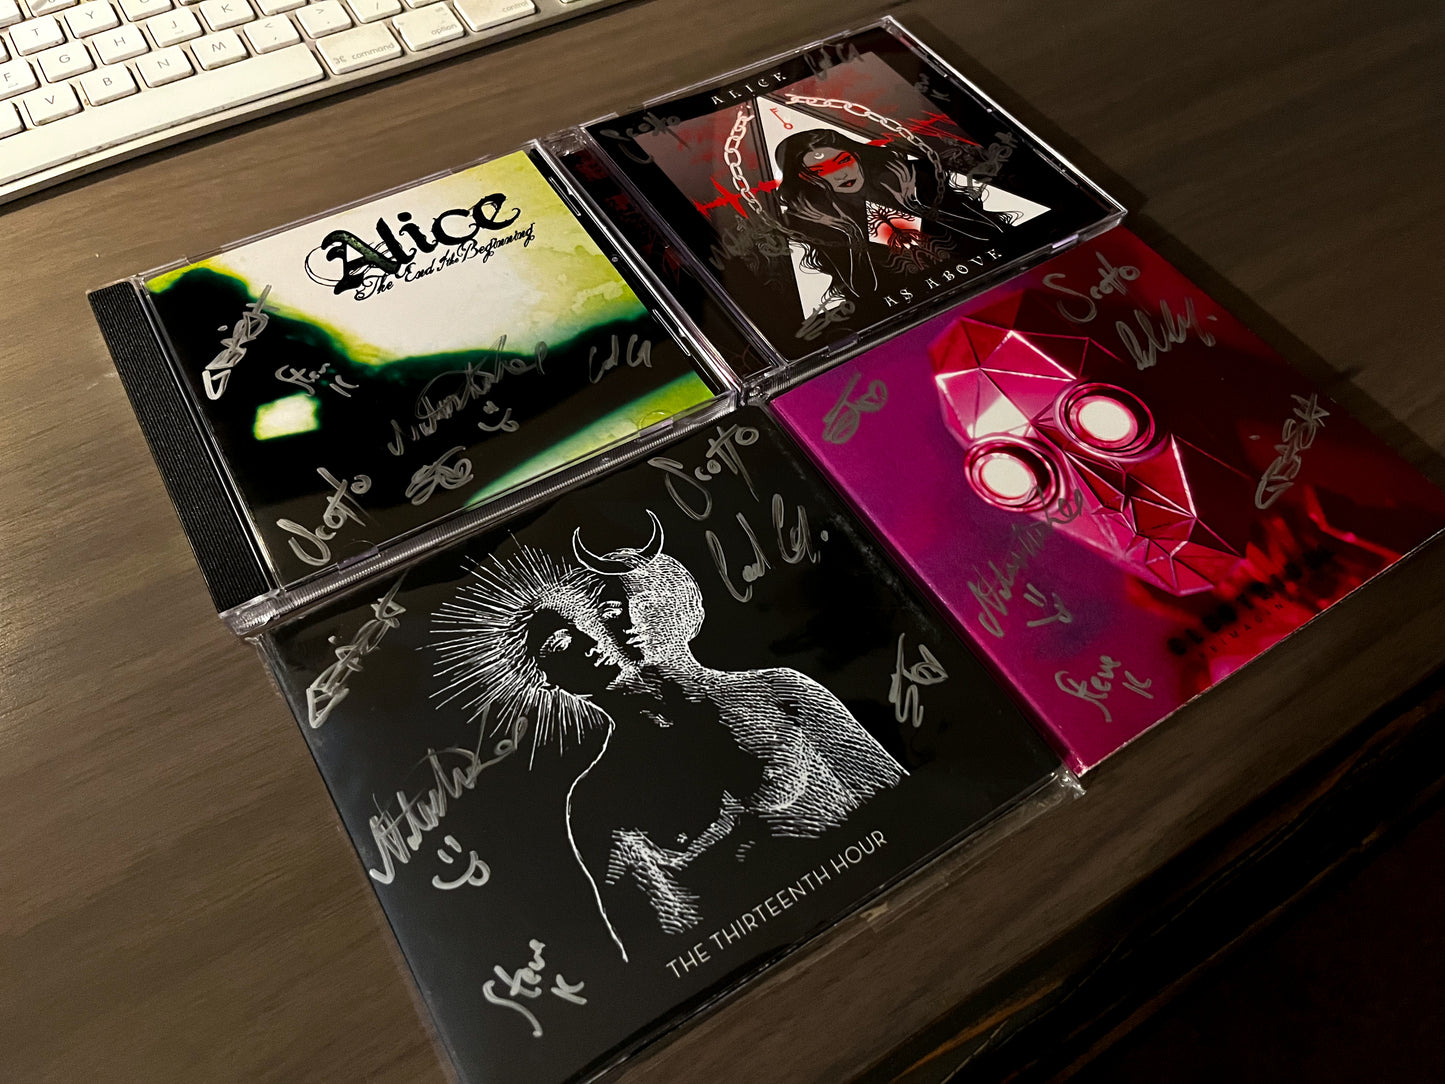 Complete CD Discography Signed by Band